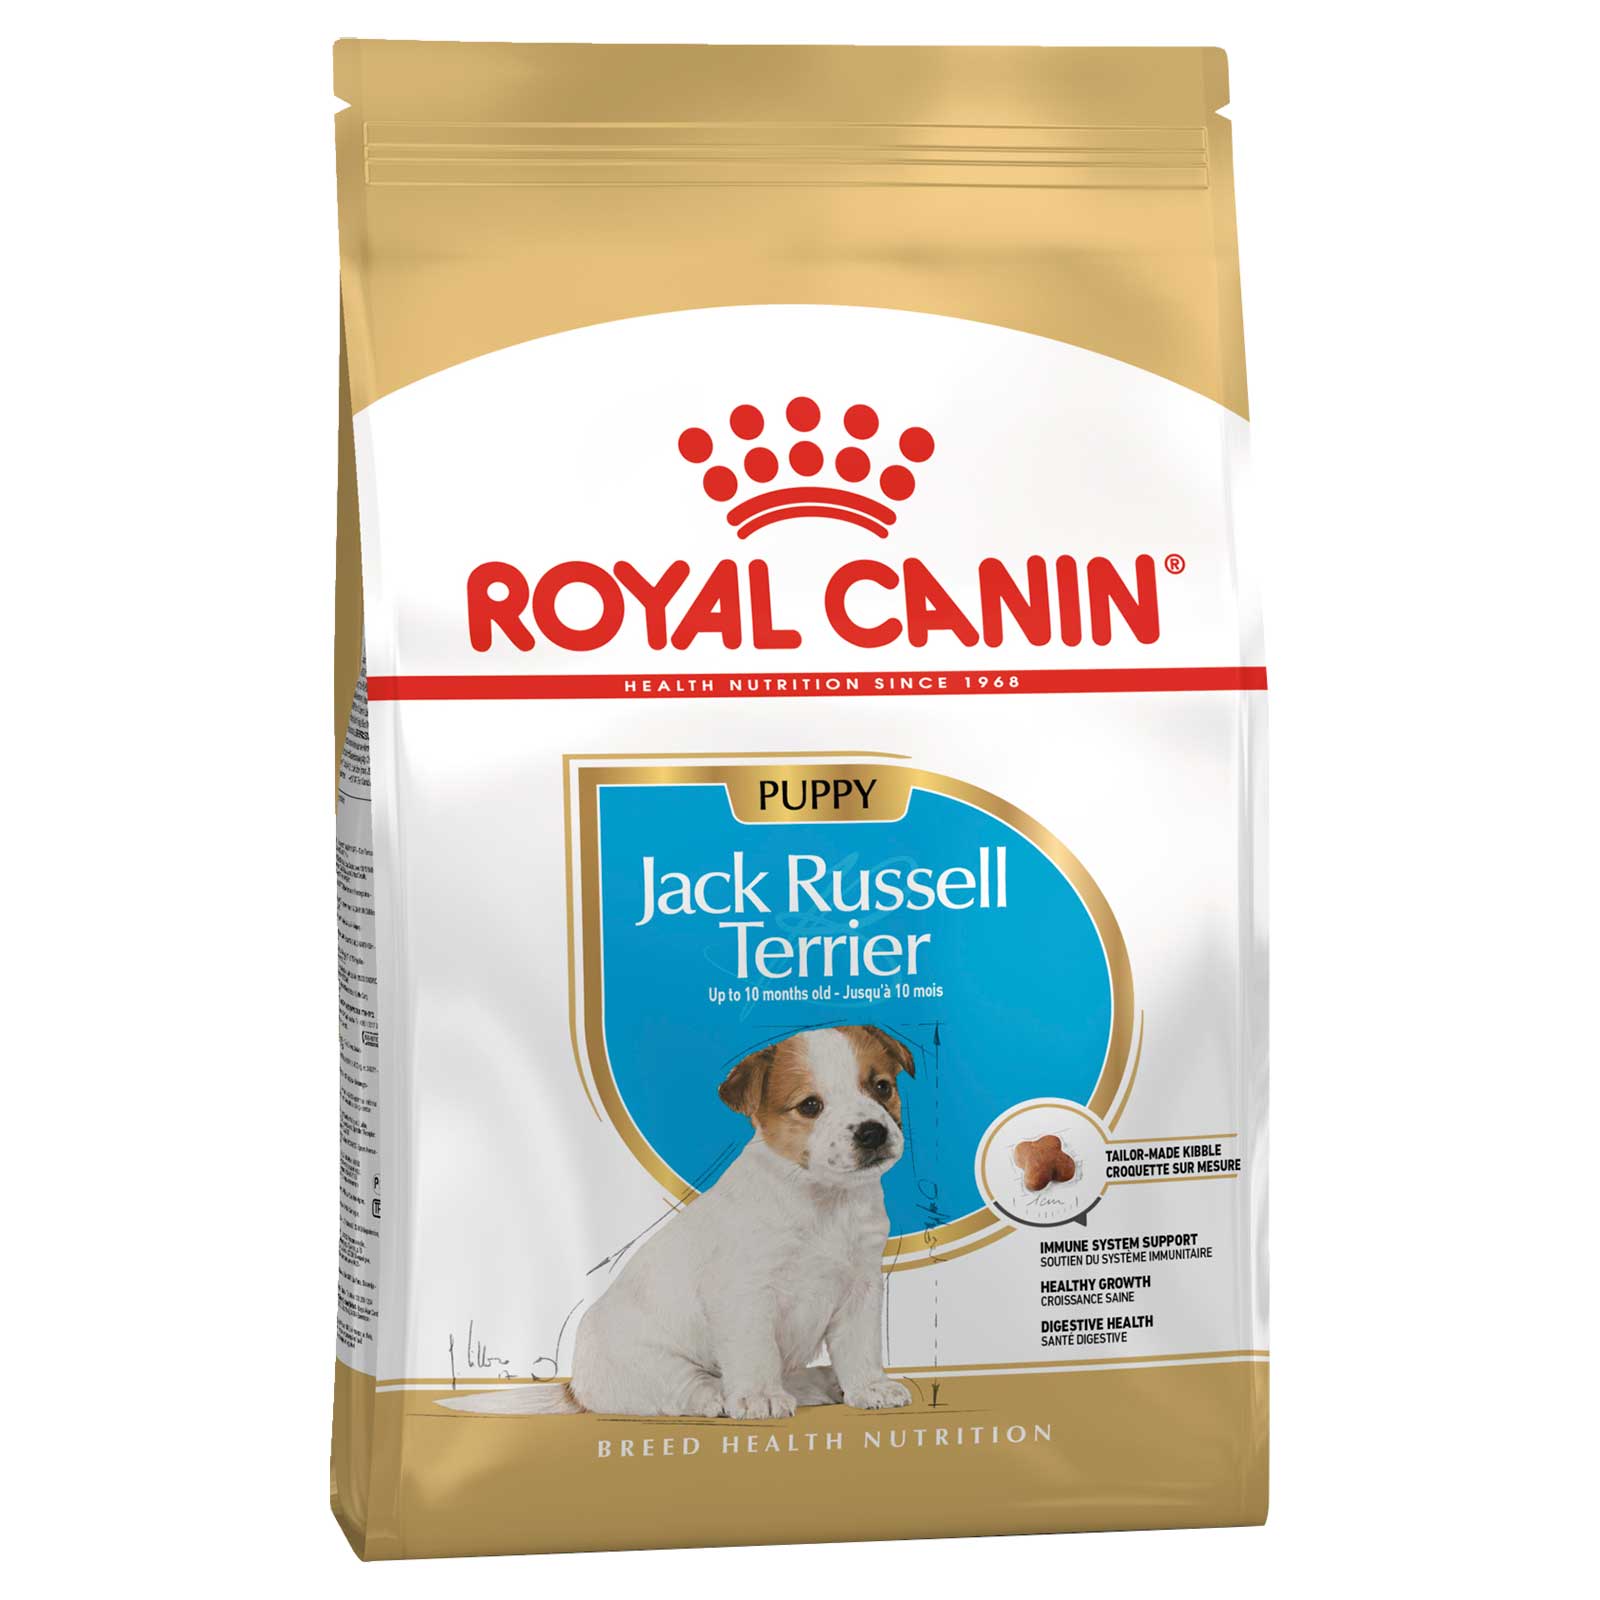 Royal Canin Dog Food Puppy Jack Russell